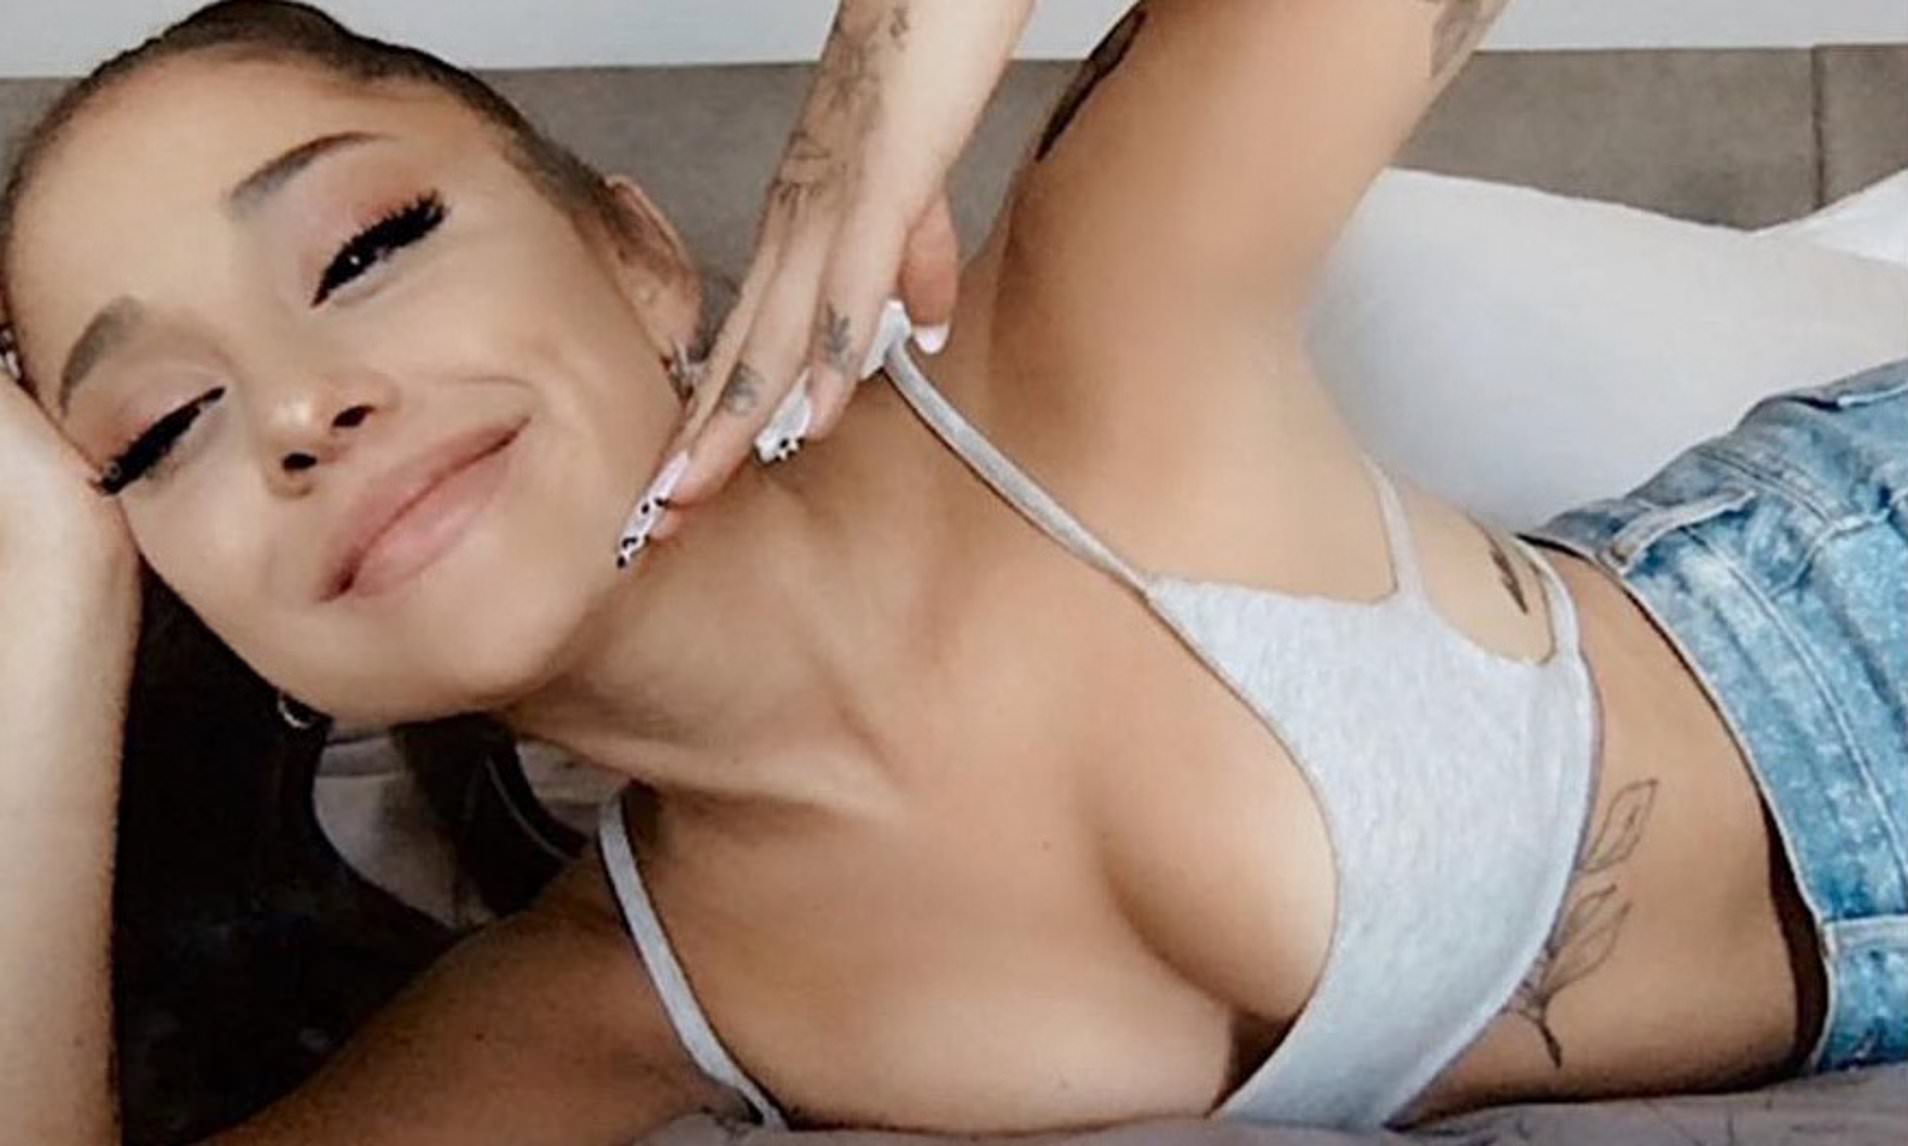 Best of Ariana grande showing boobs